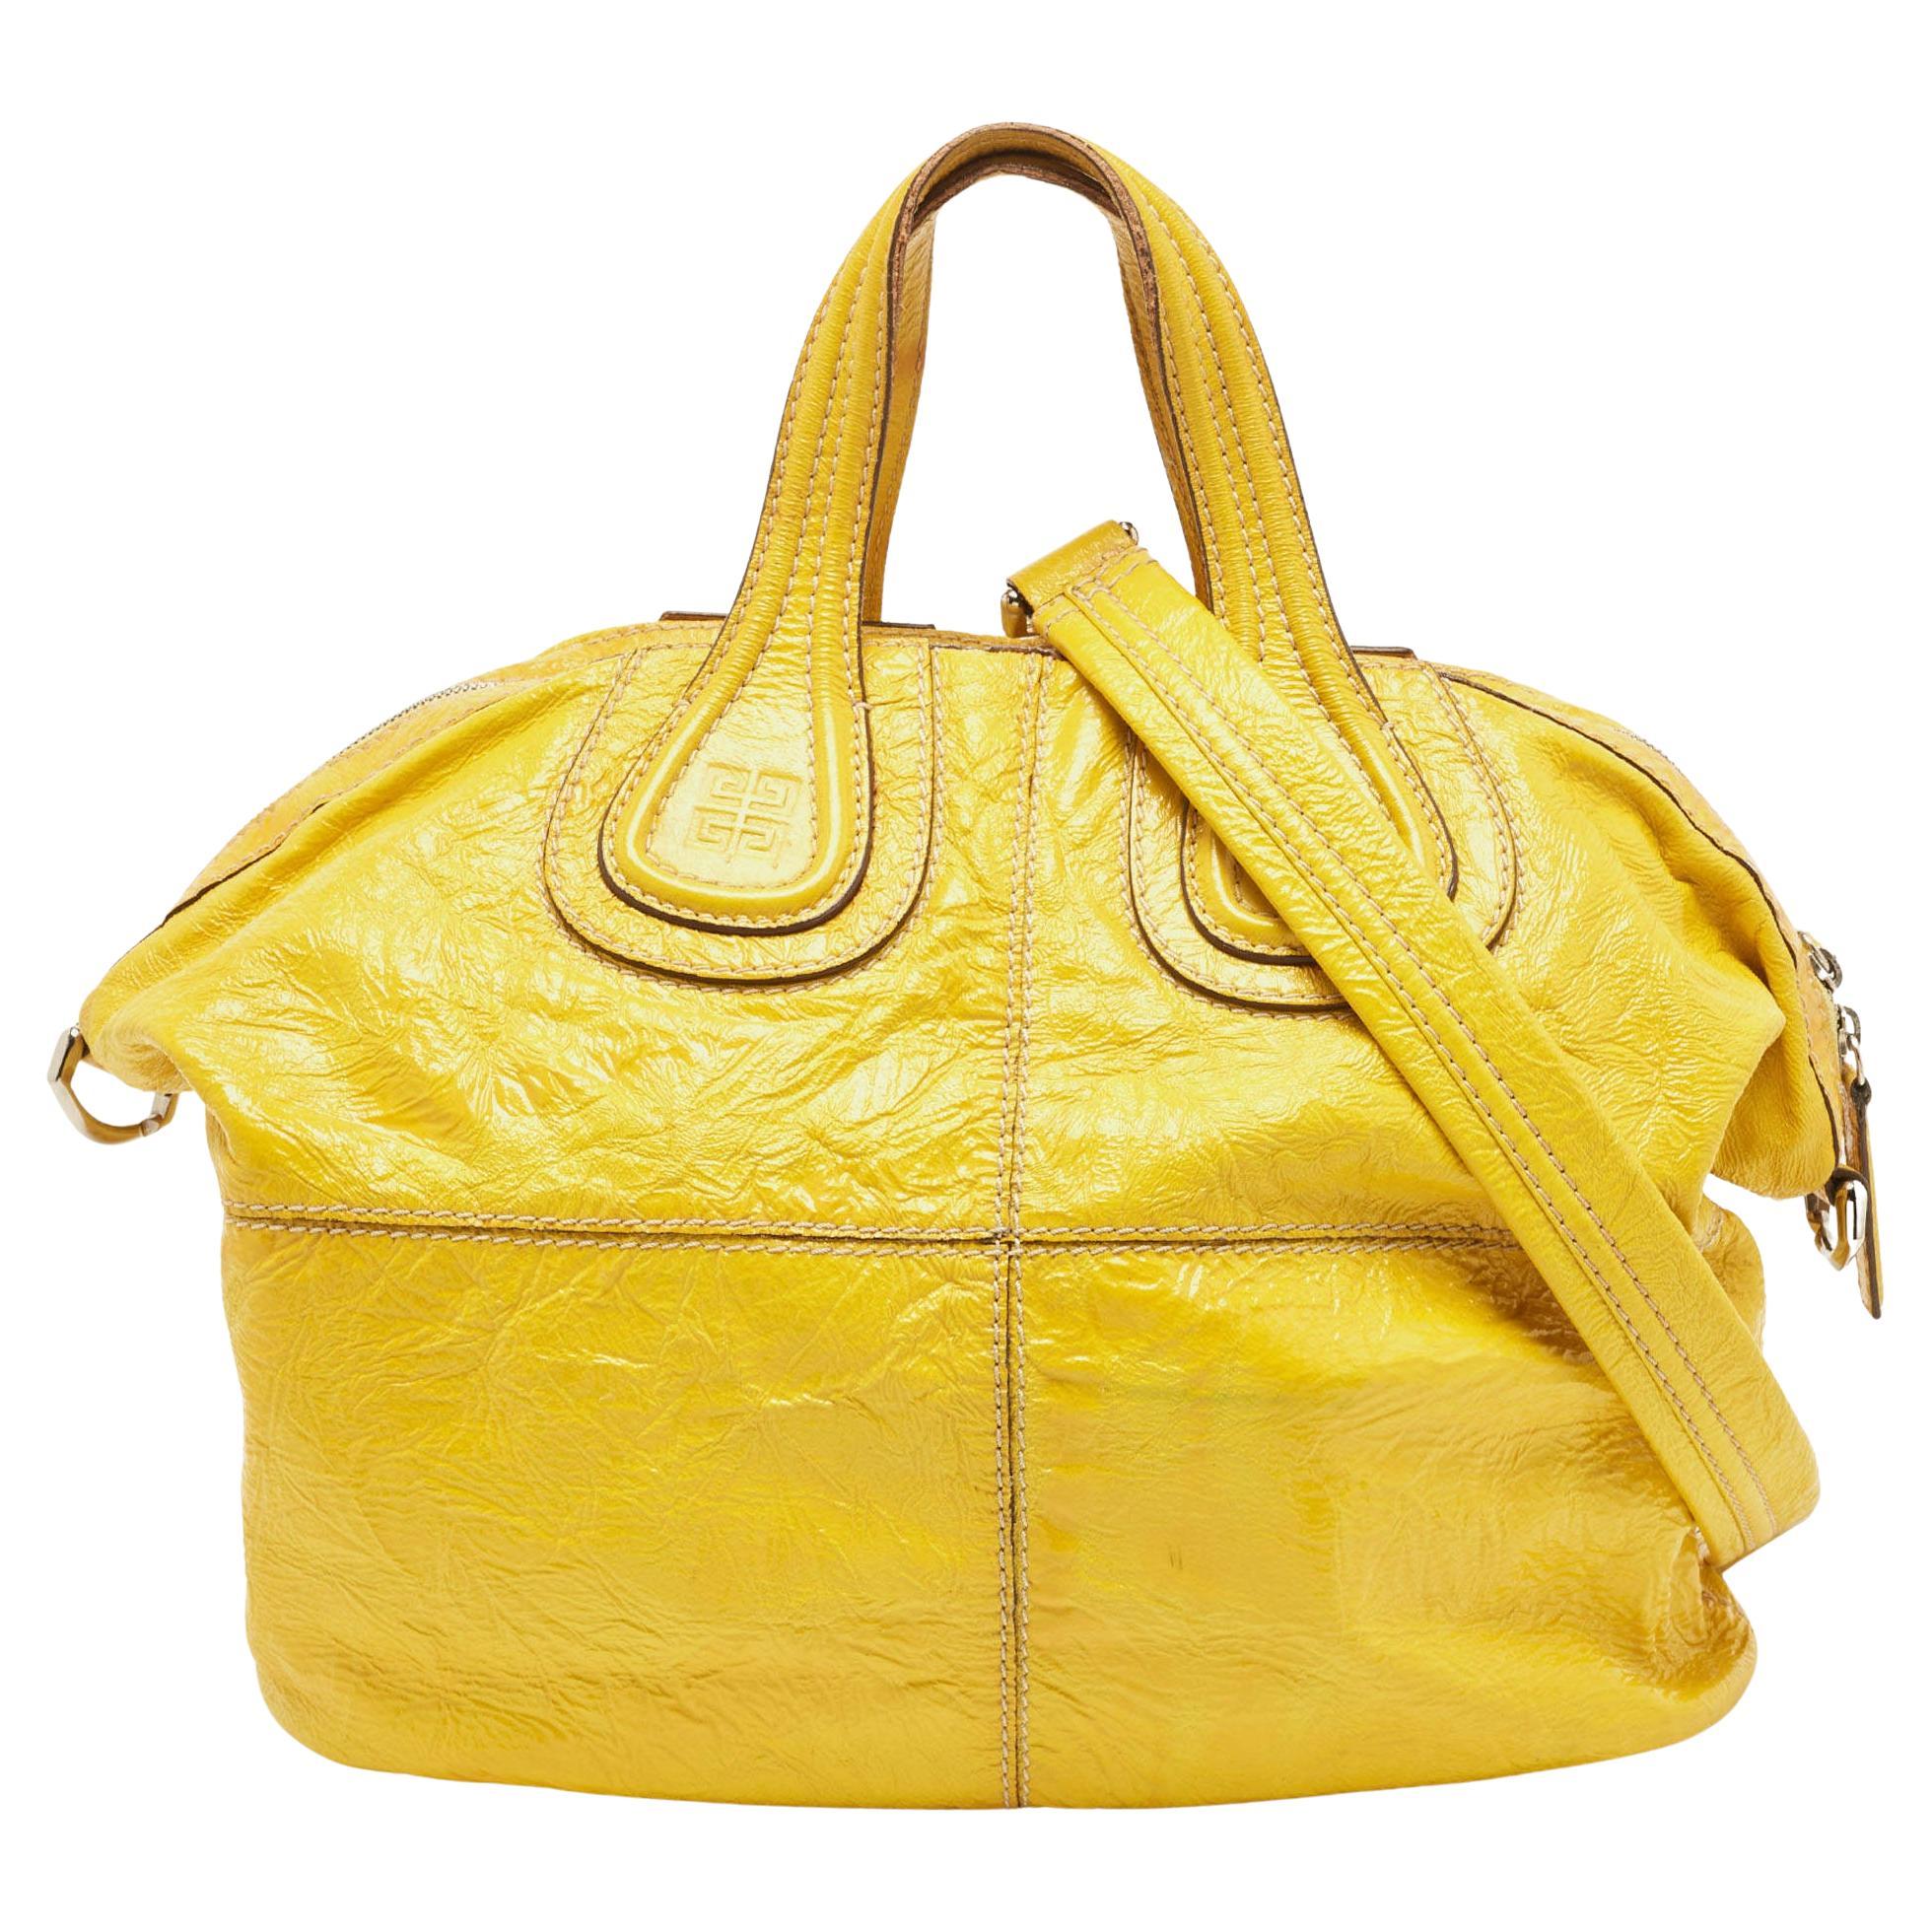 Learn Clare V Bags Art of Creating Timeless and Versatile Handbags